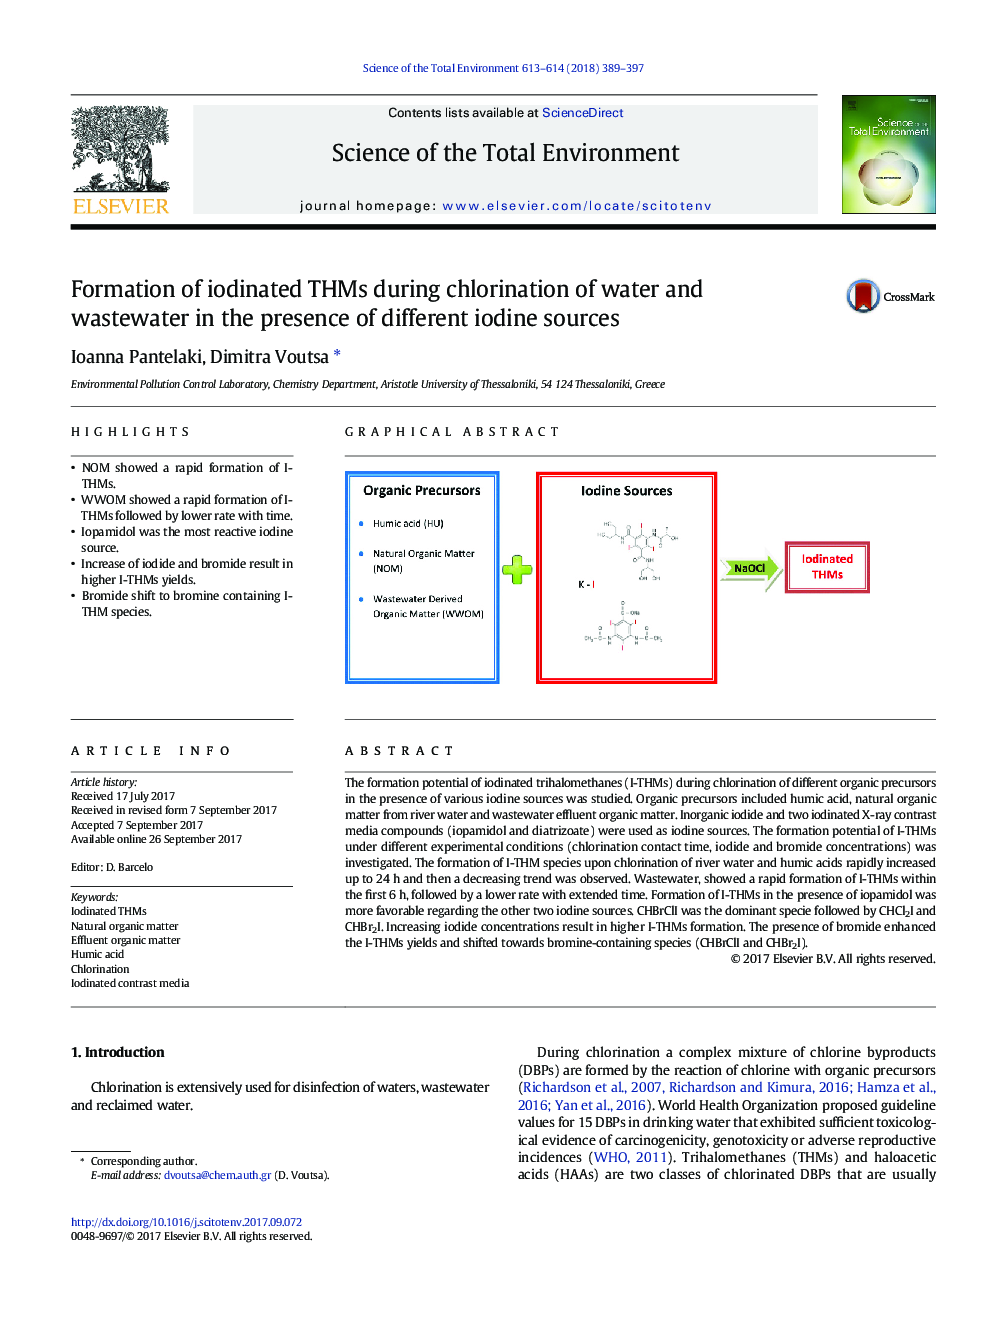 Formation of iodinated THMs during chlorination of water and wastewater in the presence of different iodine sources